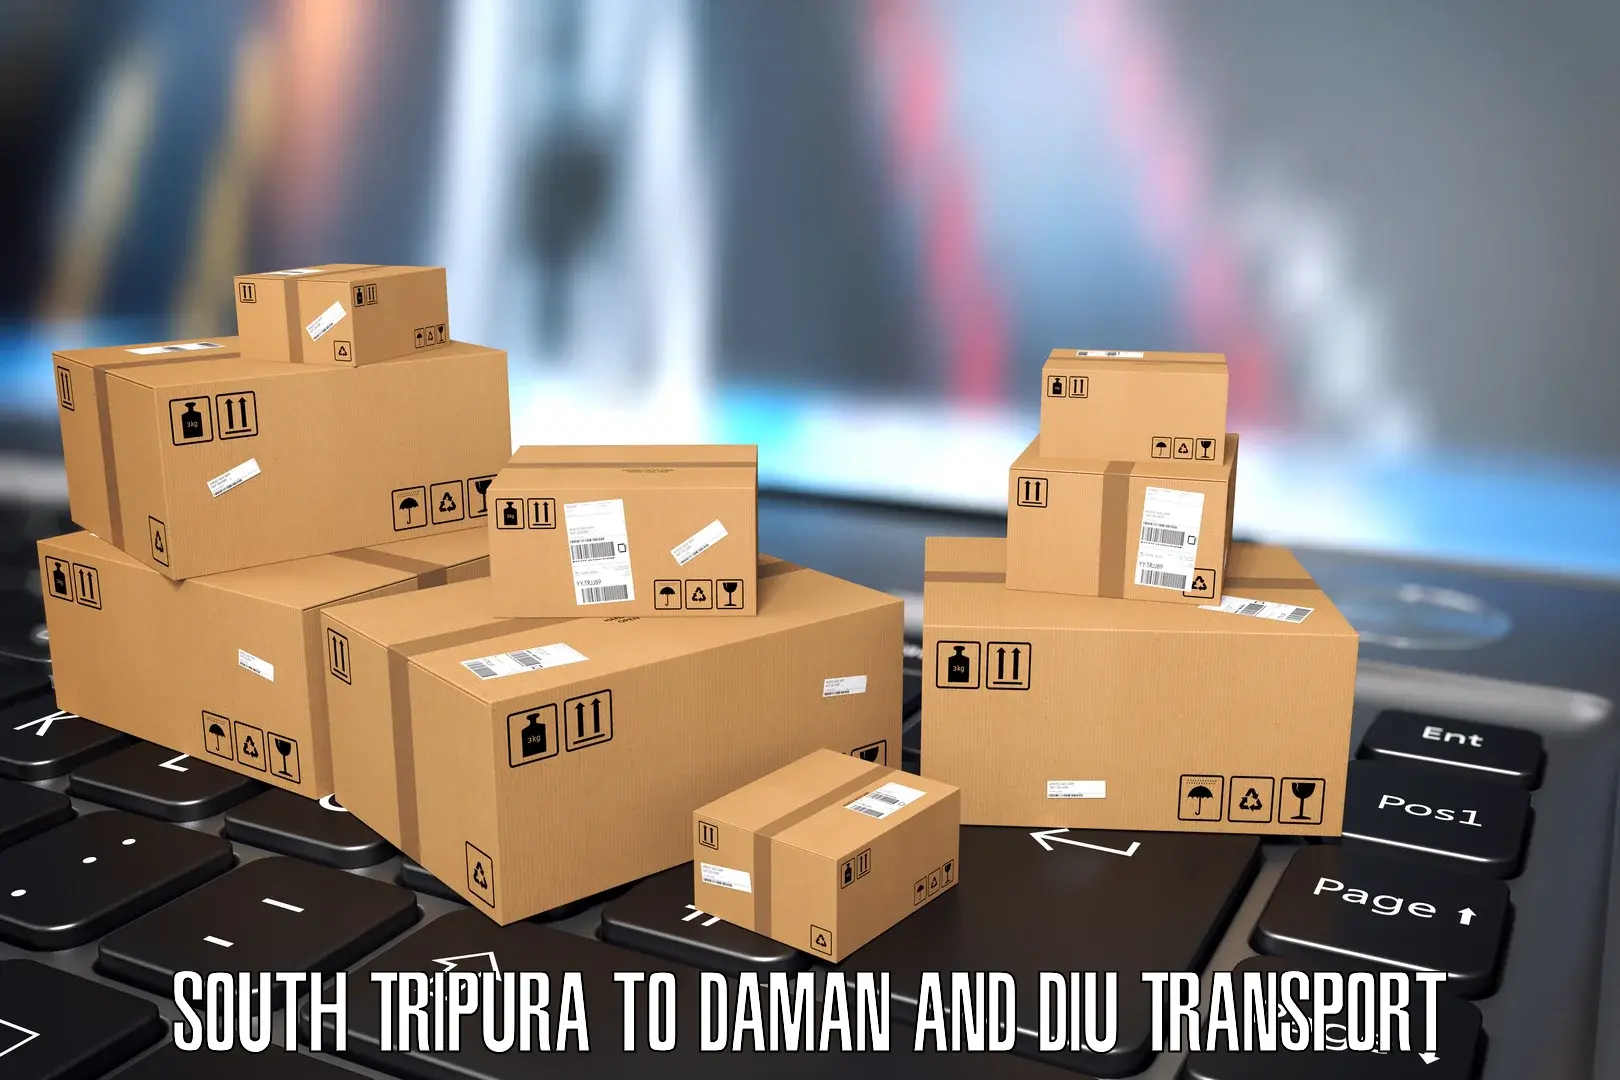 Daily parcel service transport South Tripura to Diu